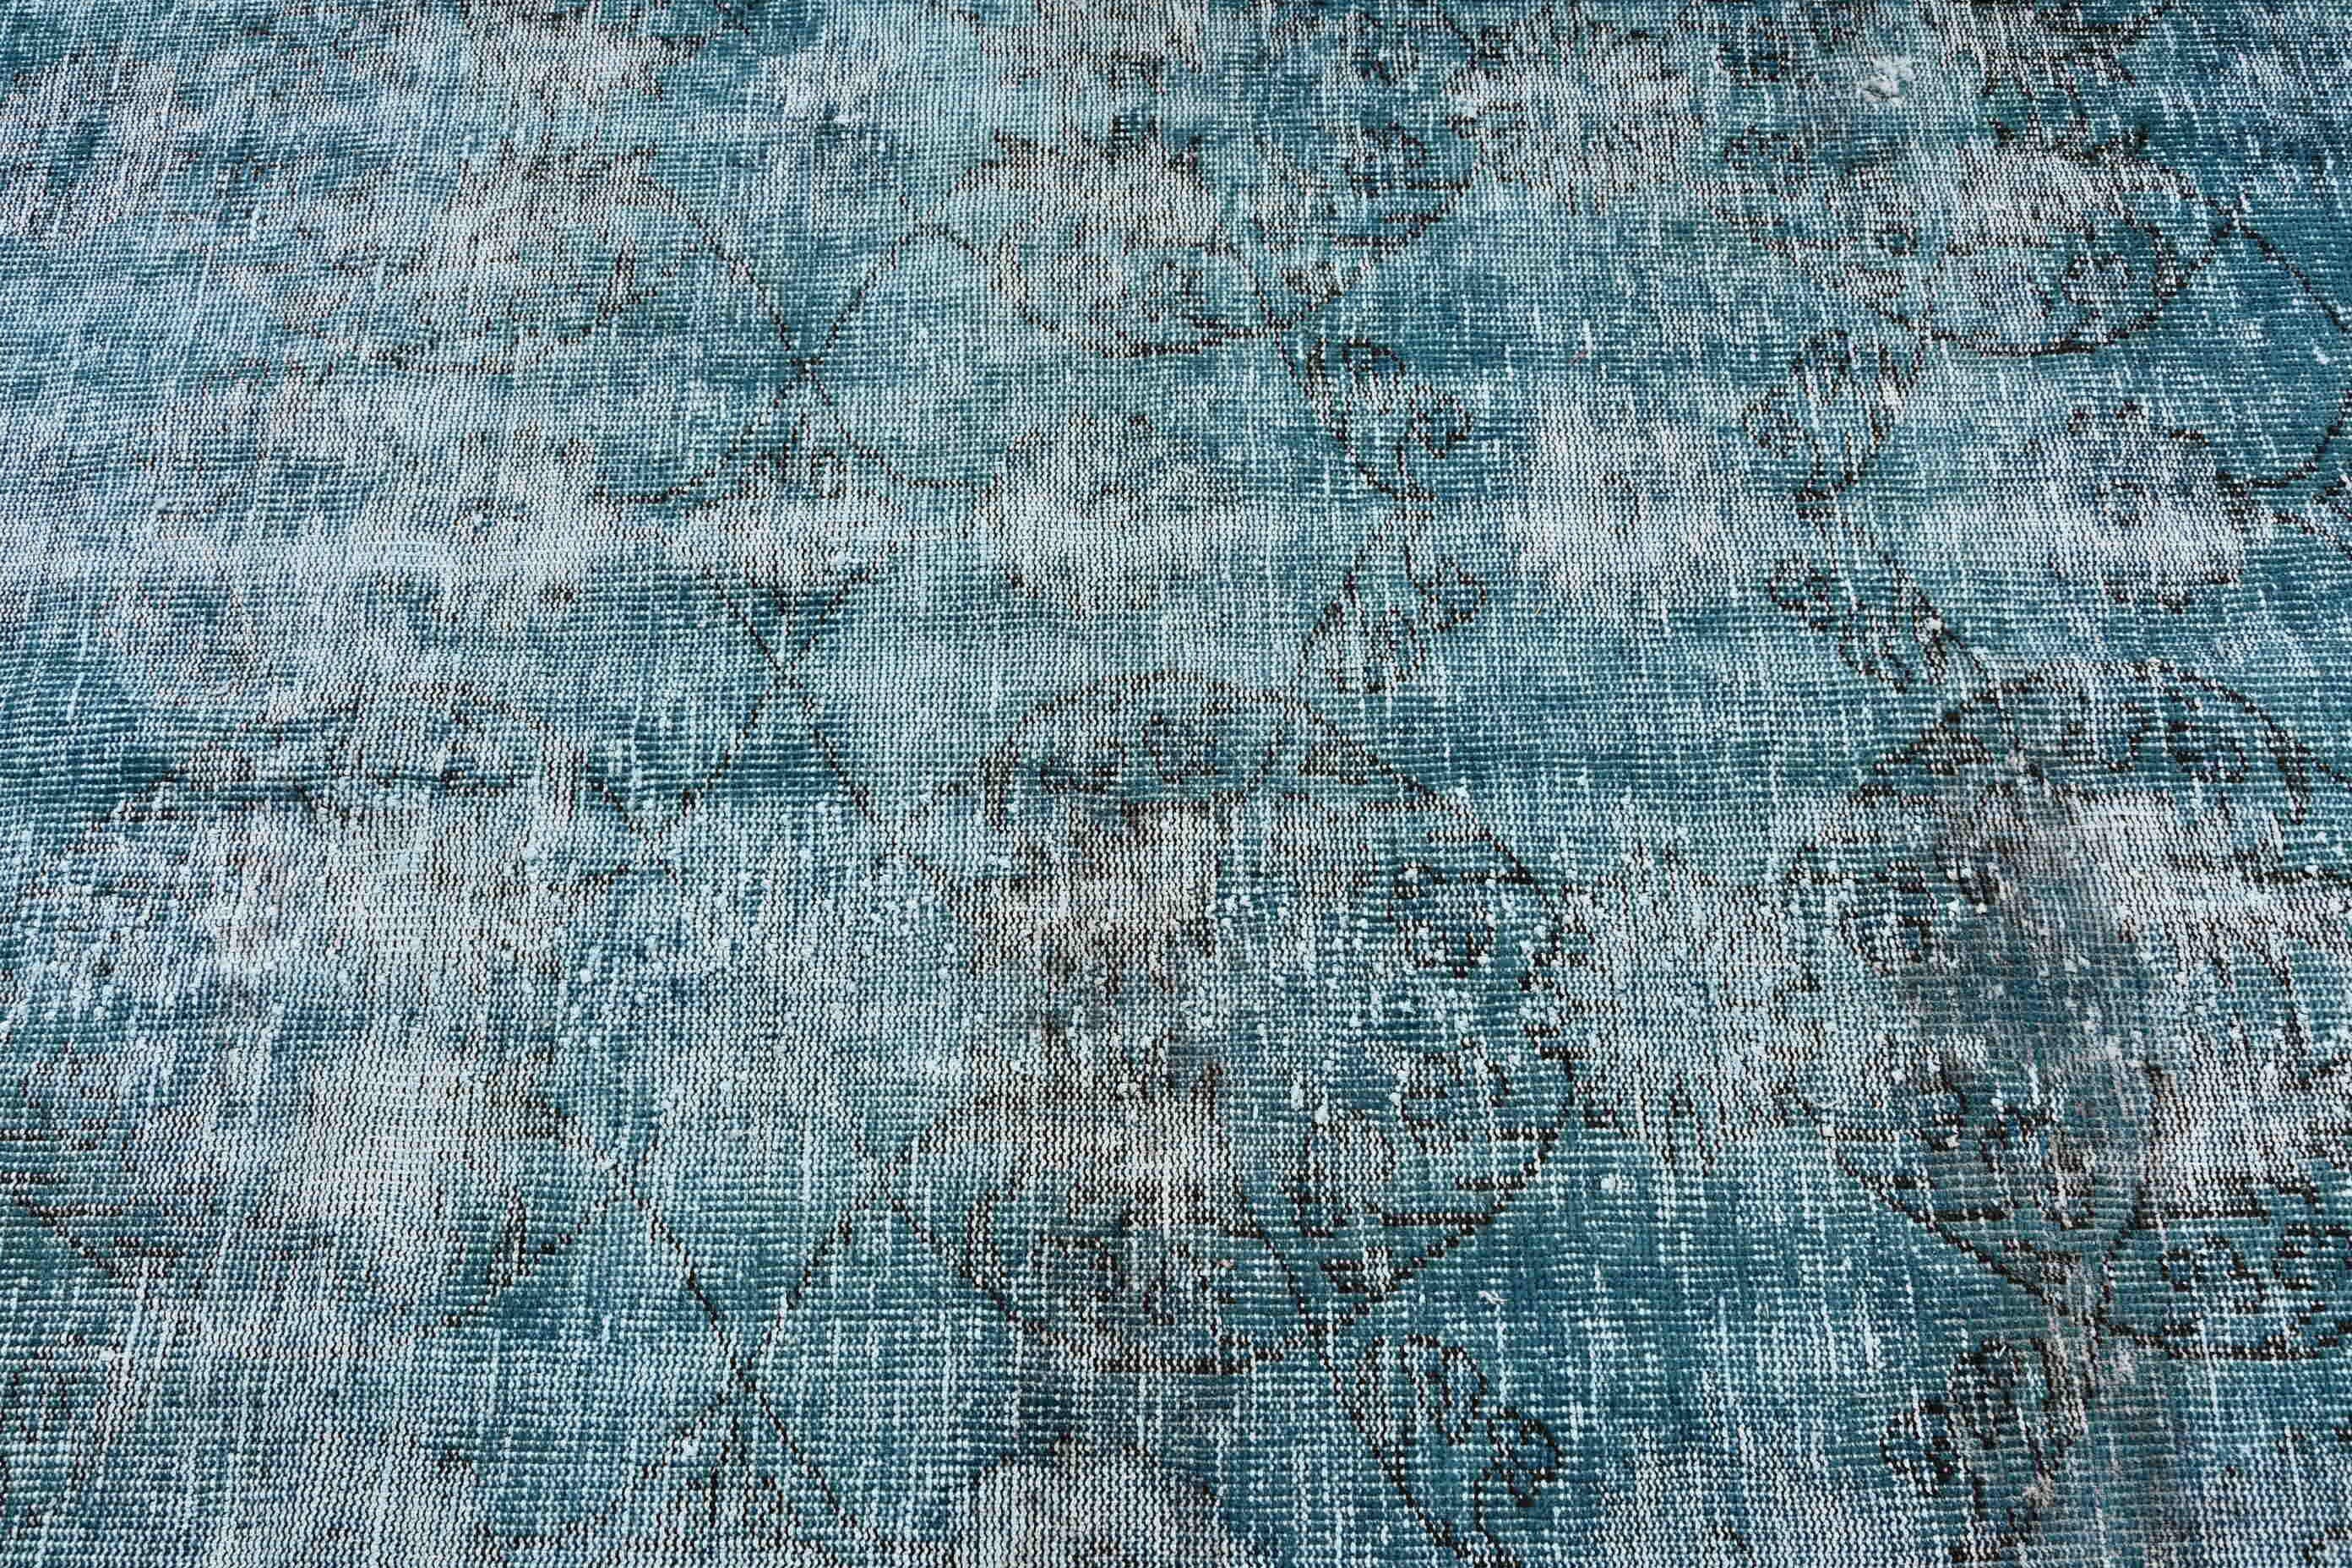 Rugs for Kitchen, Vintage Rugs, 4.5x5.1 ft Accent Rugs, Vintage Accent Rug Rugs, Turkish Rug, Bedroom Rug, Moroccan Rug, Blue Kitchen Rugs